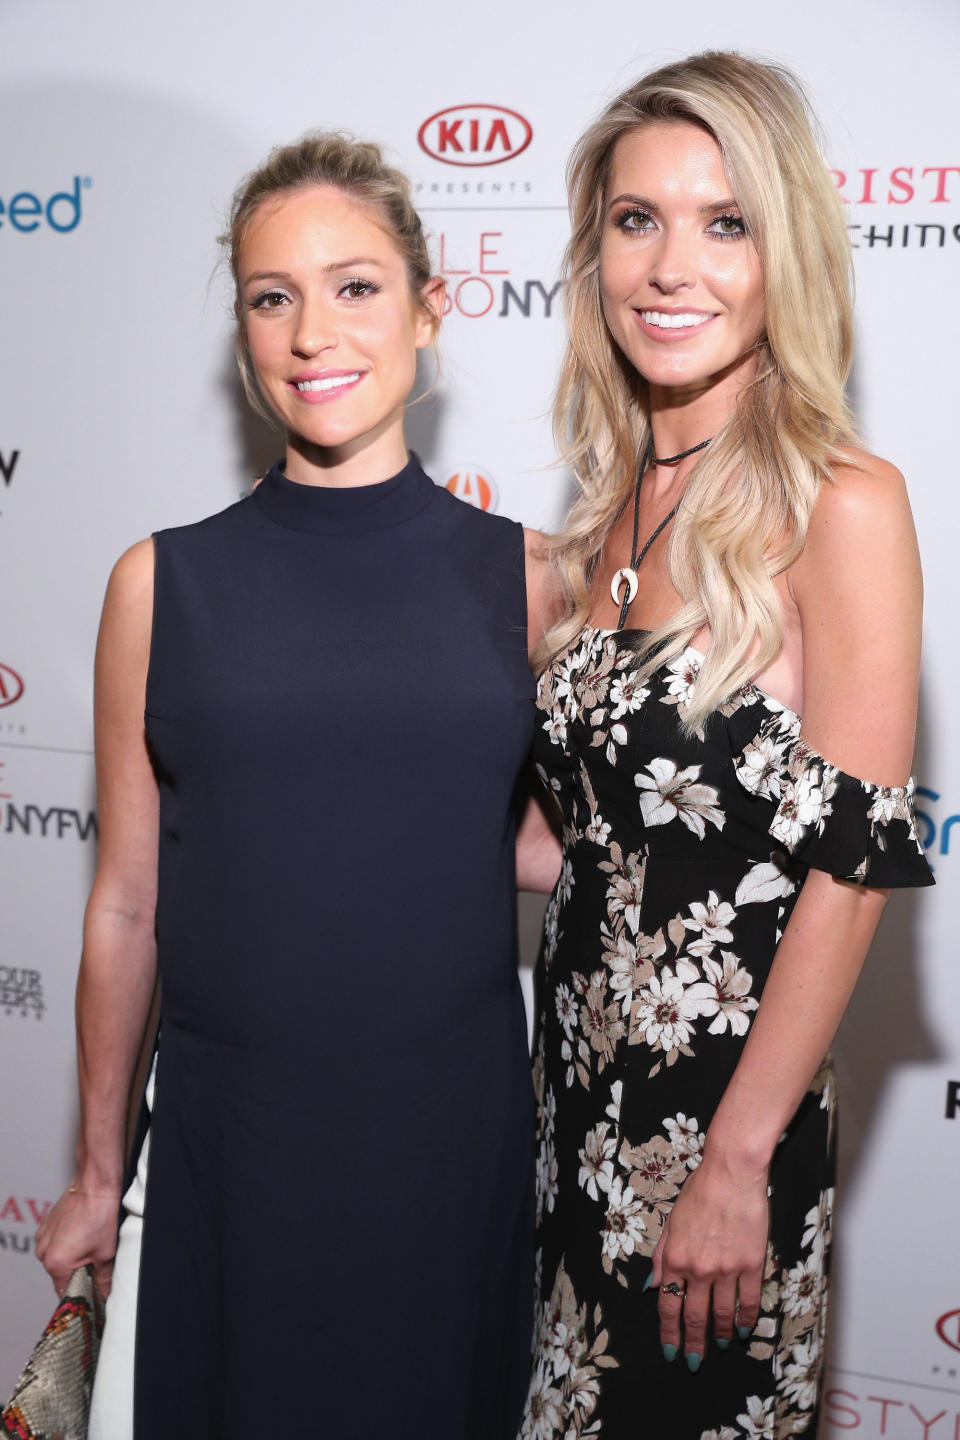 The former "The Hills" co-stars&nbsp;attended the&nbsp;Kristin Cavallari By Chinese Laundry presentation at Row NYC on Sept.17, 2015 in New York City.